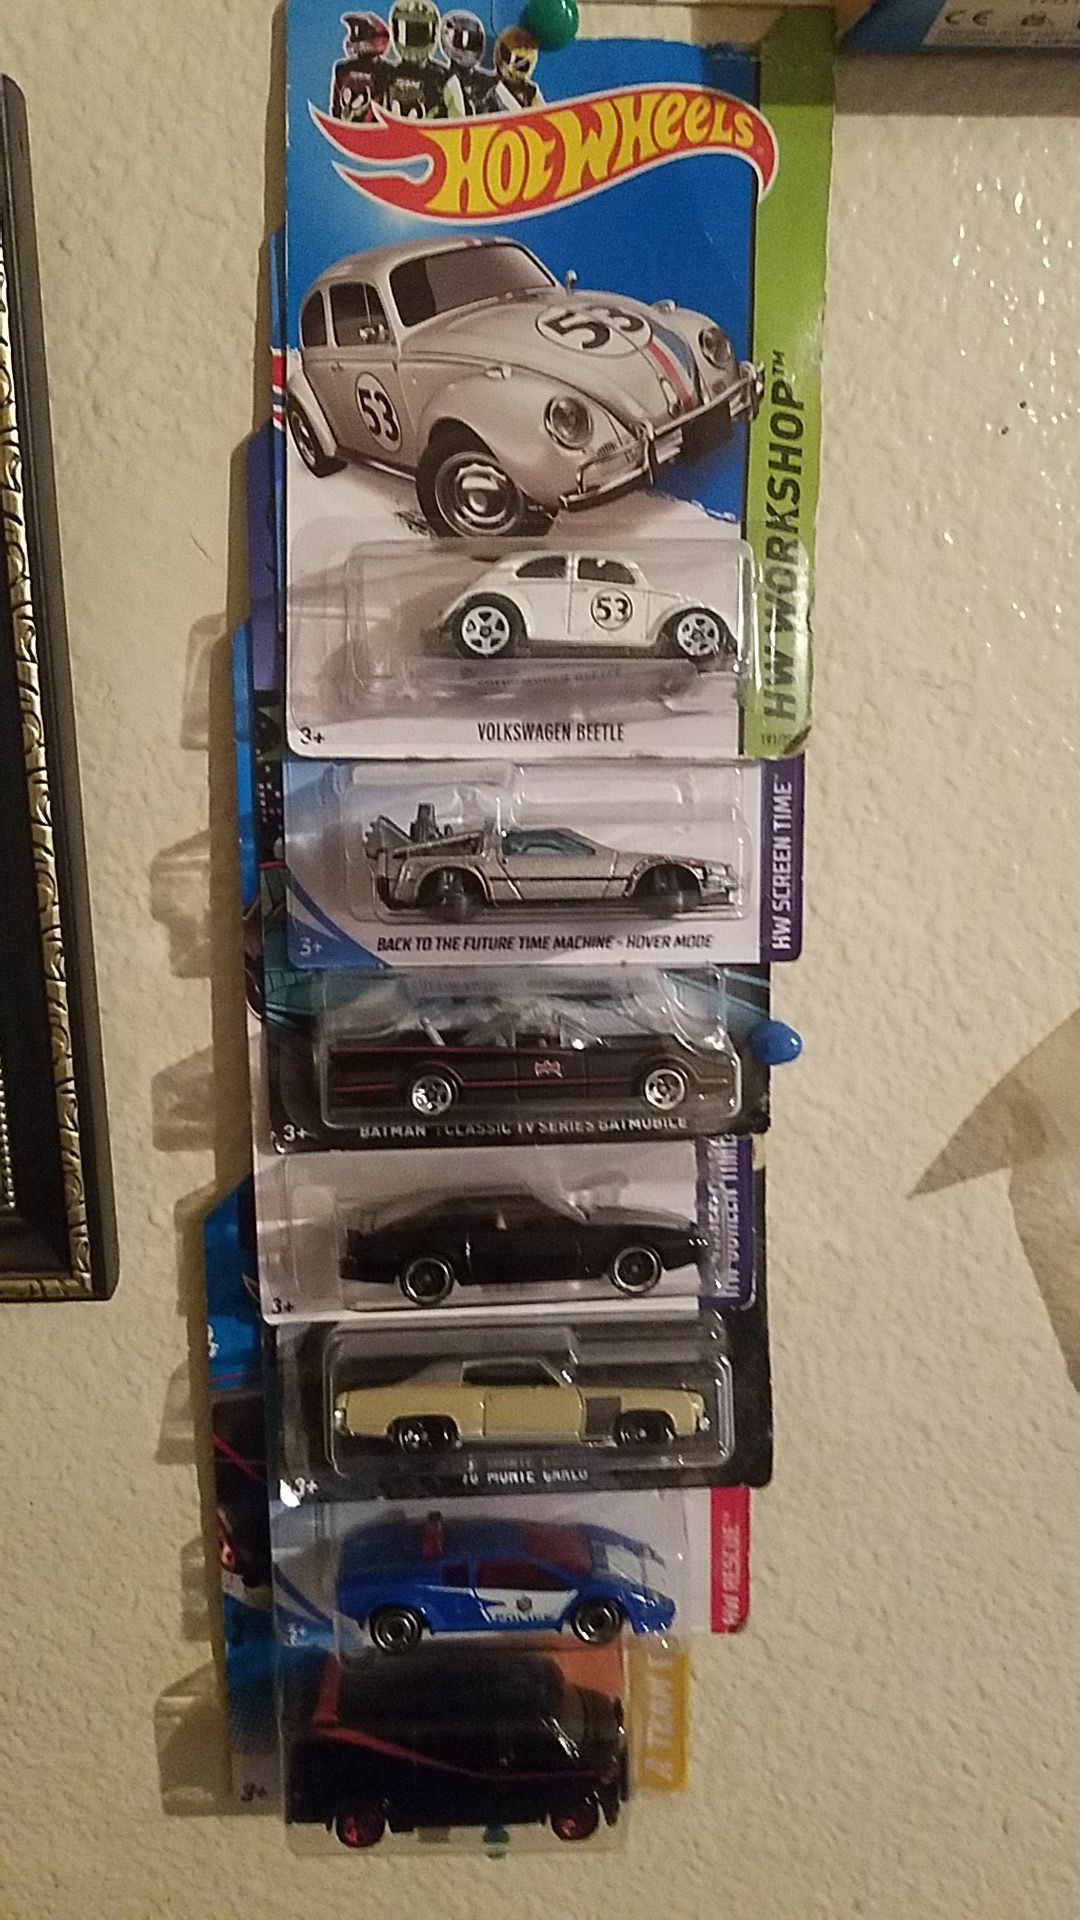 Hot Wheels collection will not separate